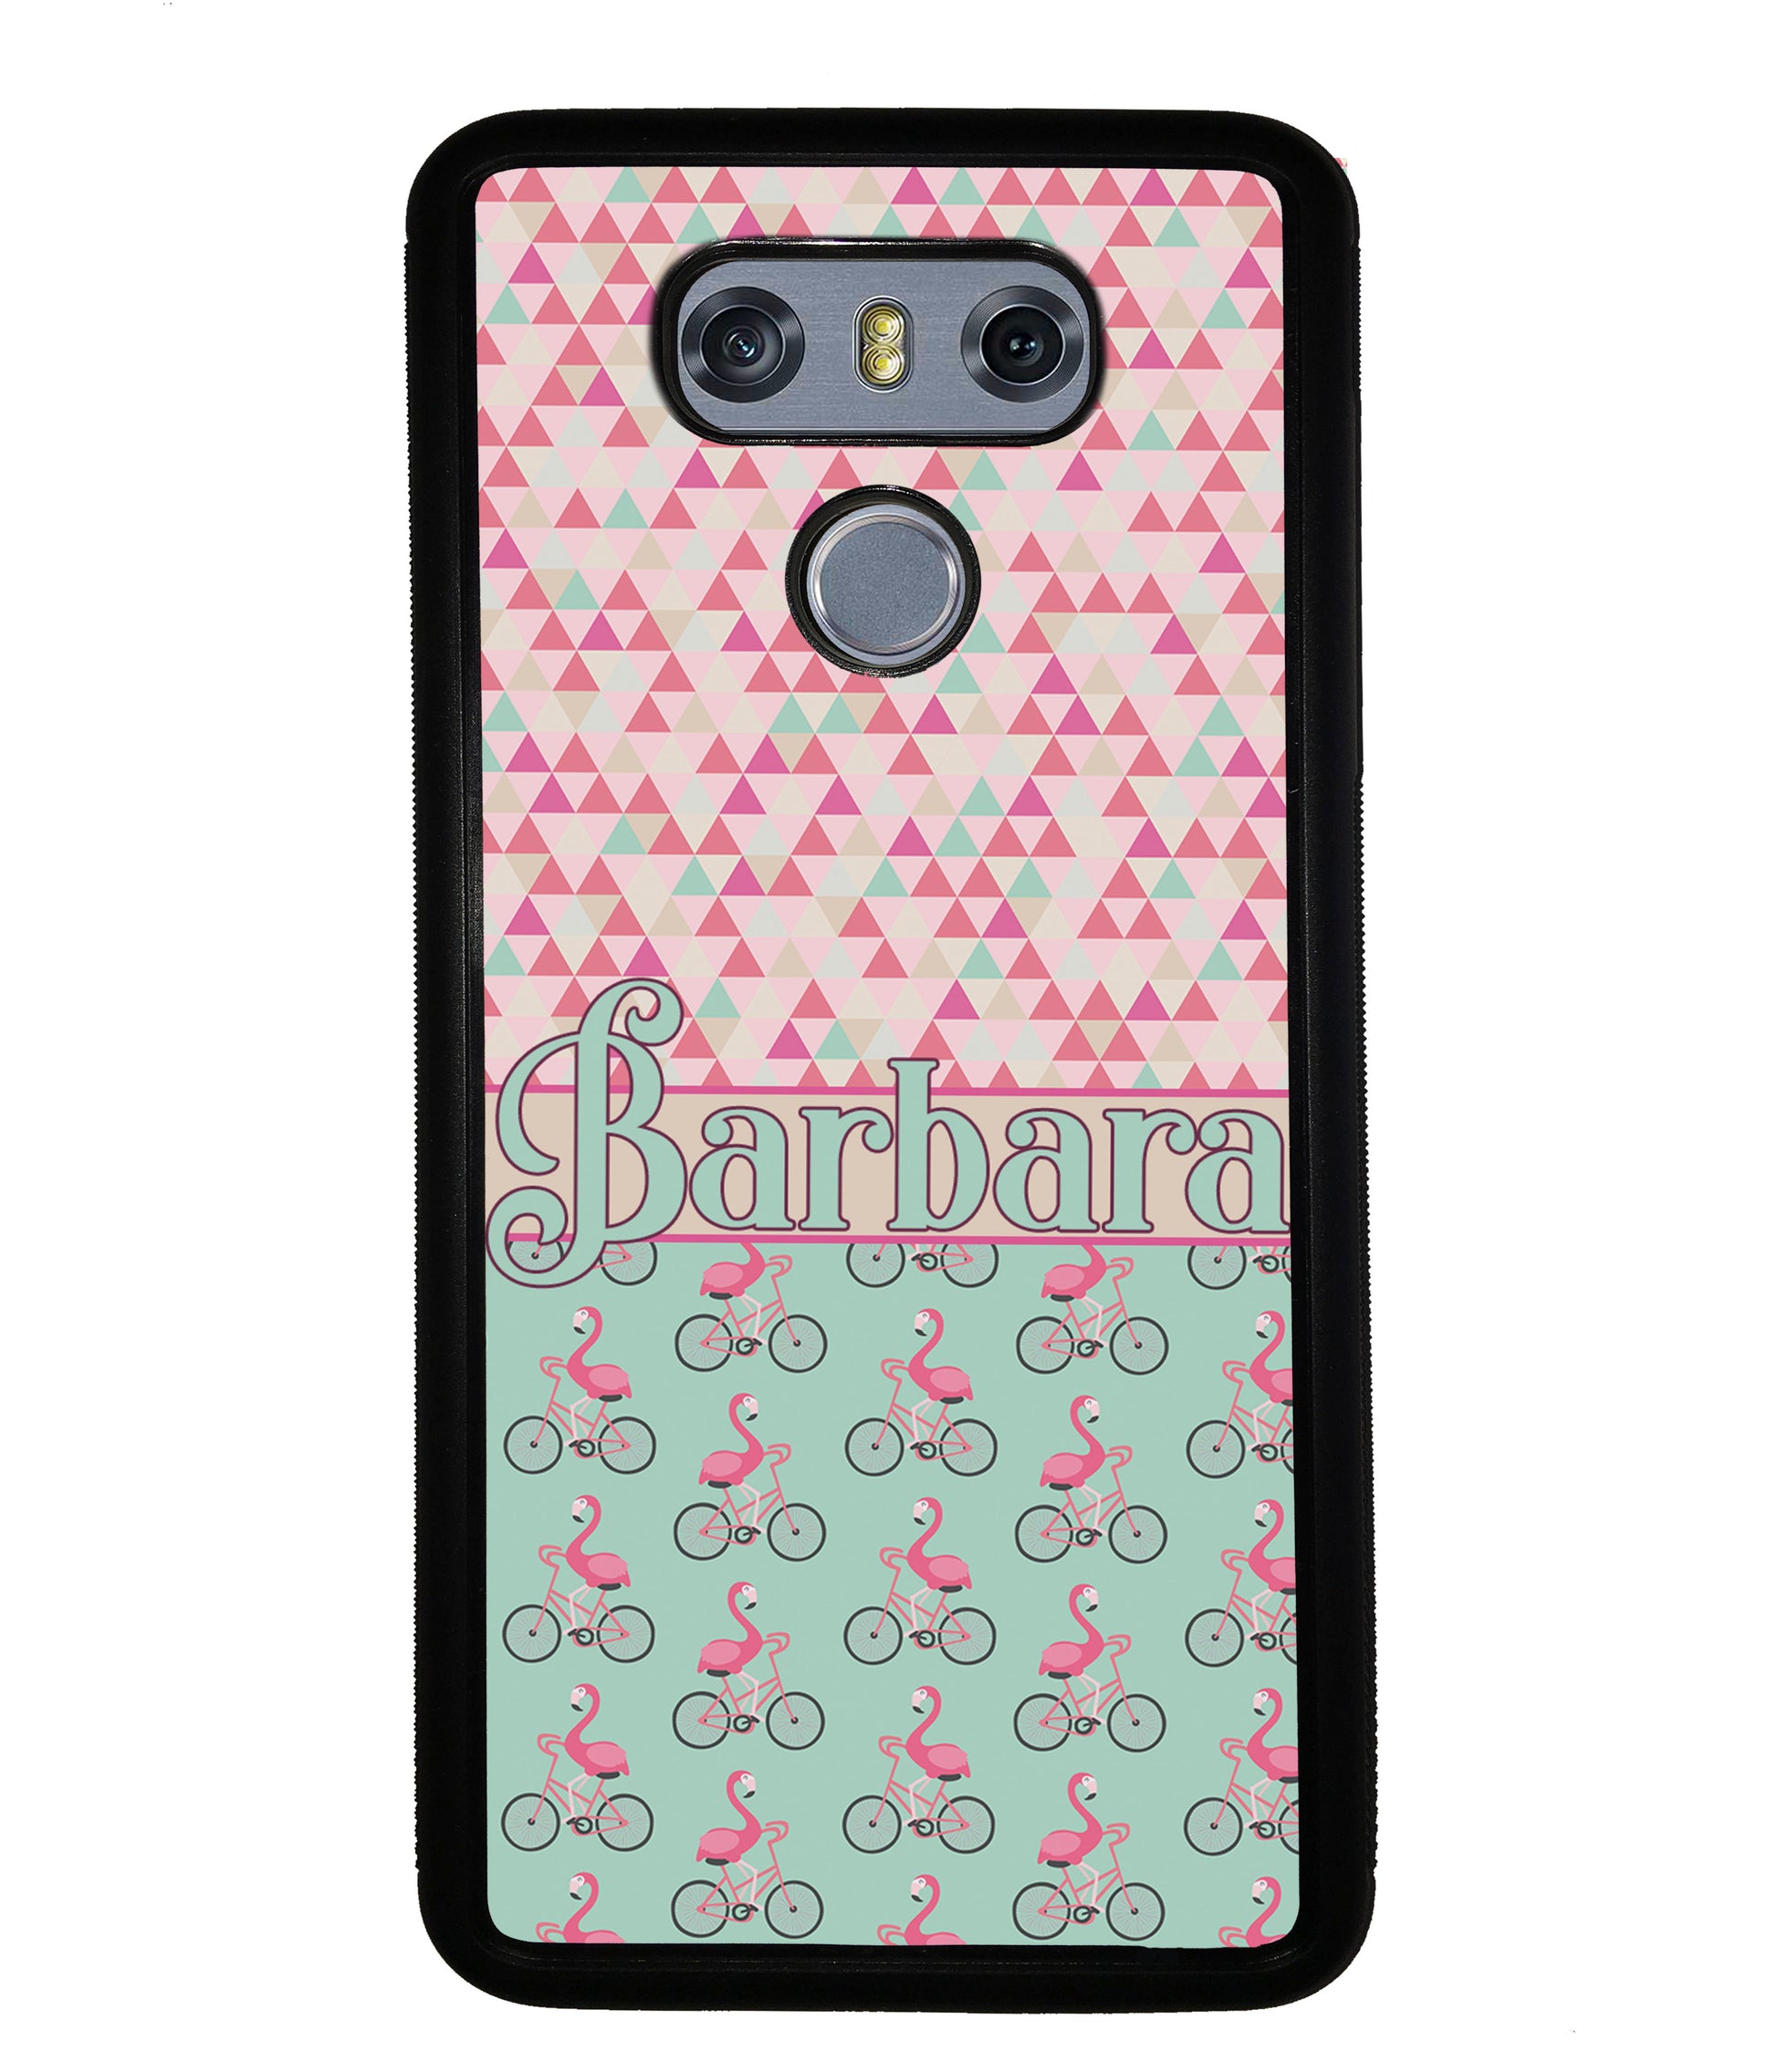 Flamingo's on Bicycle's Personalized | LG Phone Case